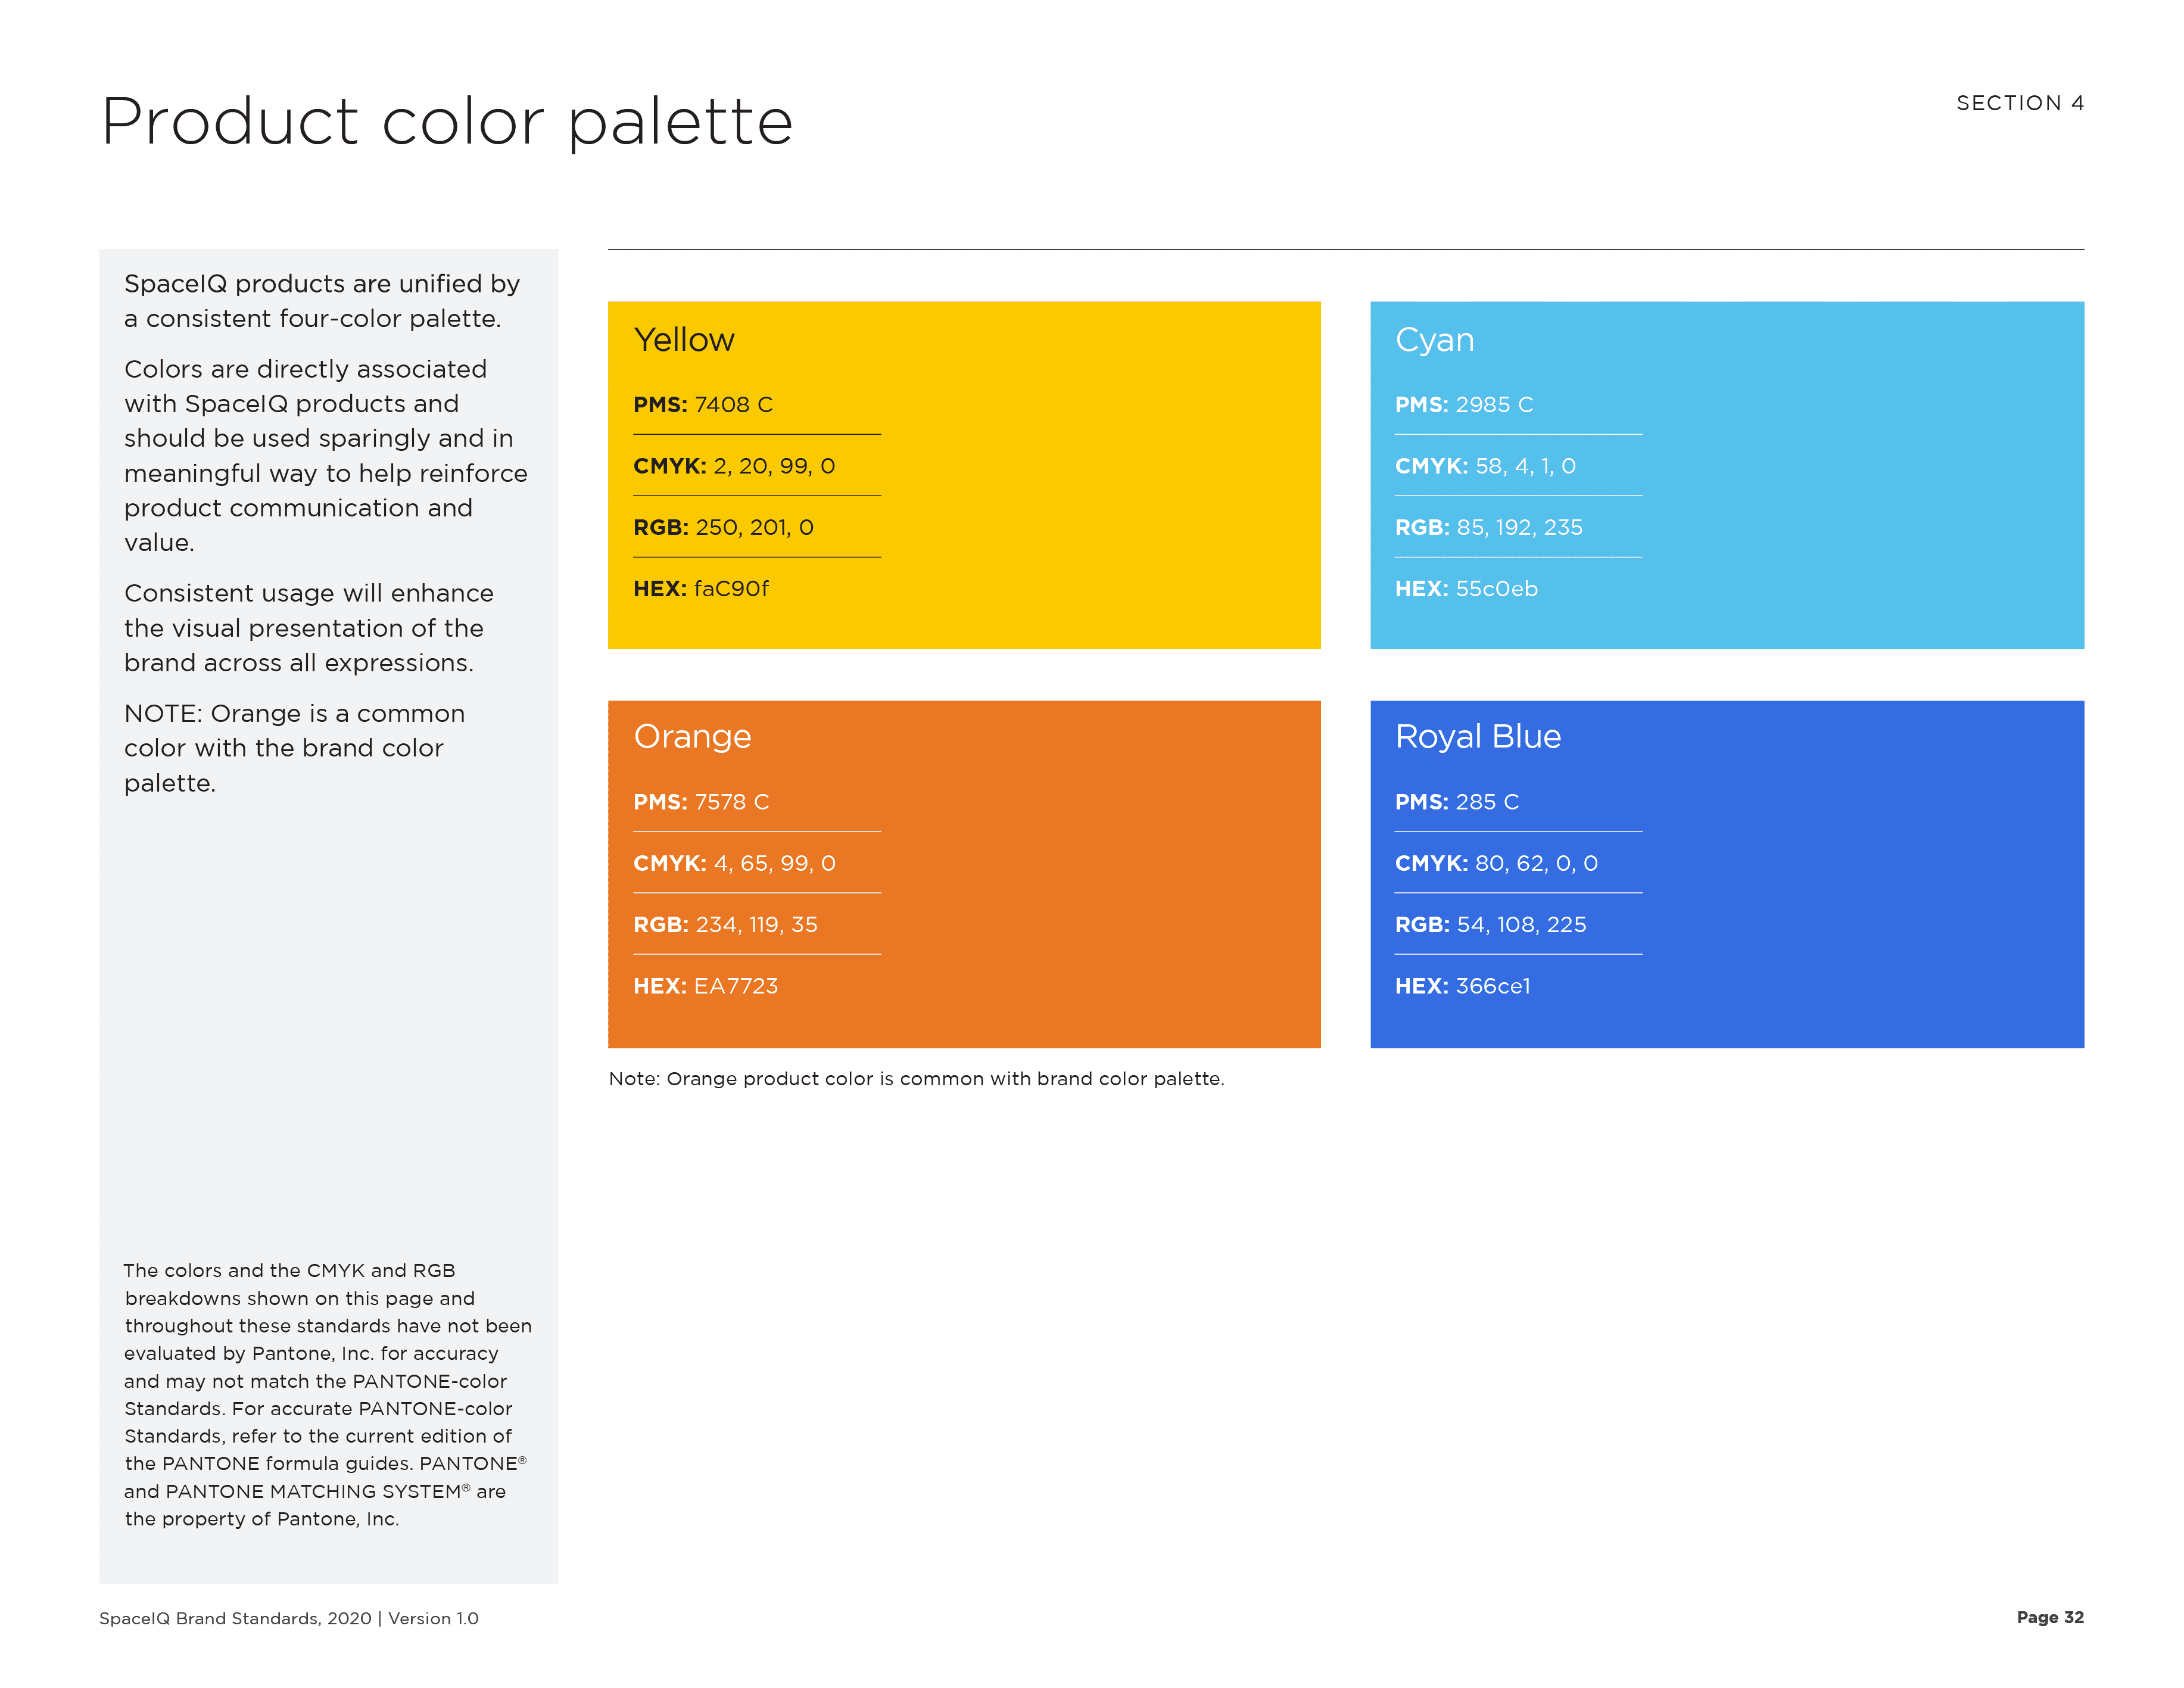 SpaceIQ Brand Guidelines Product color palette